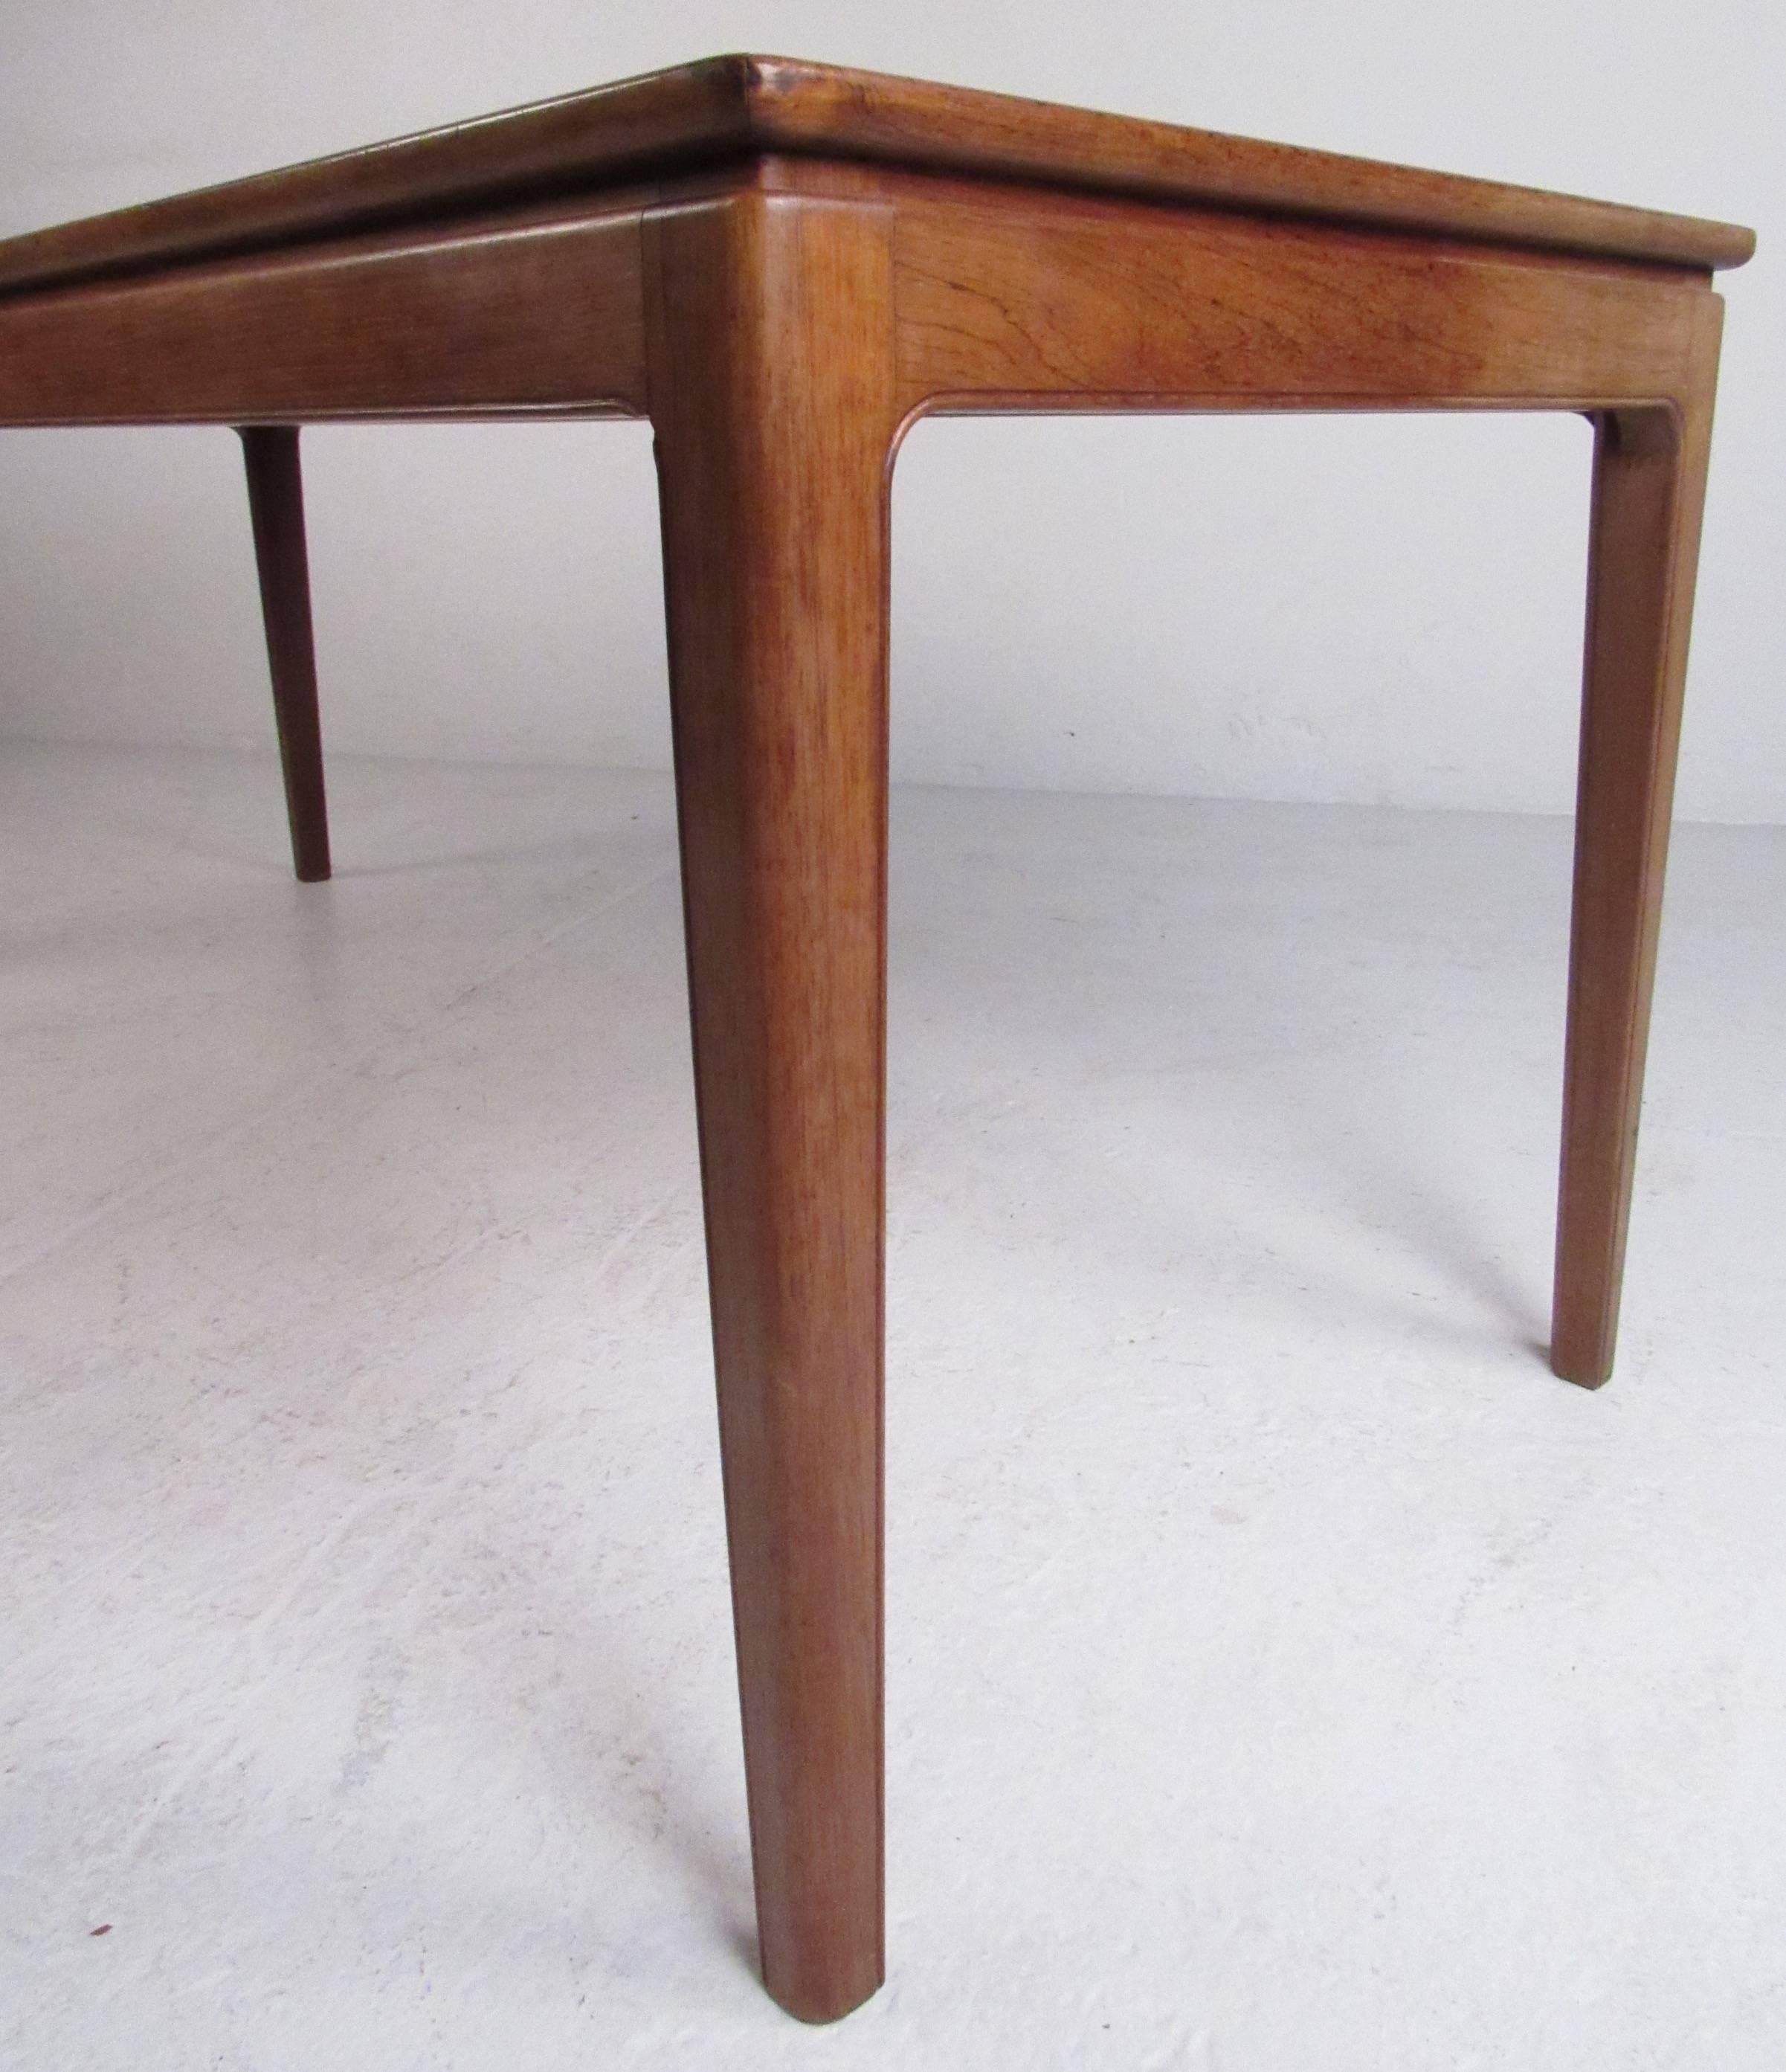 Mid-Century Modern Mid-Century Tile Top Coffee Table For Sale